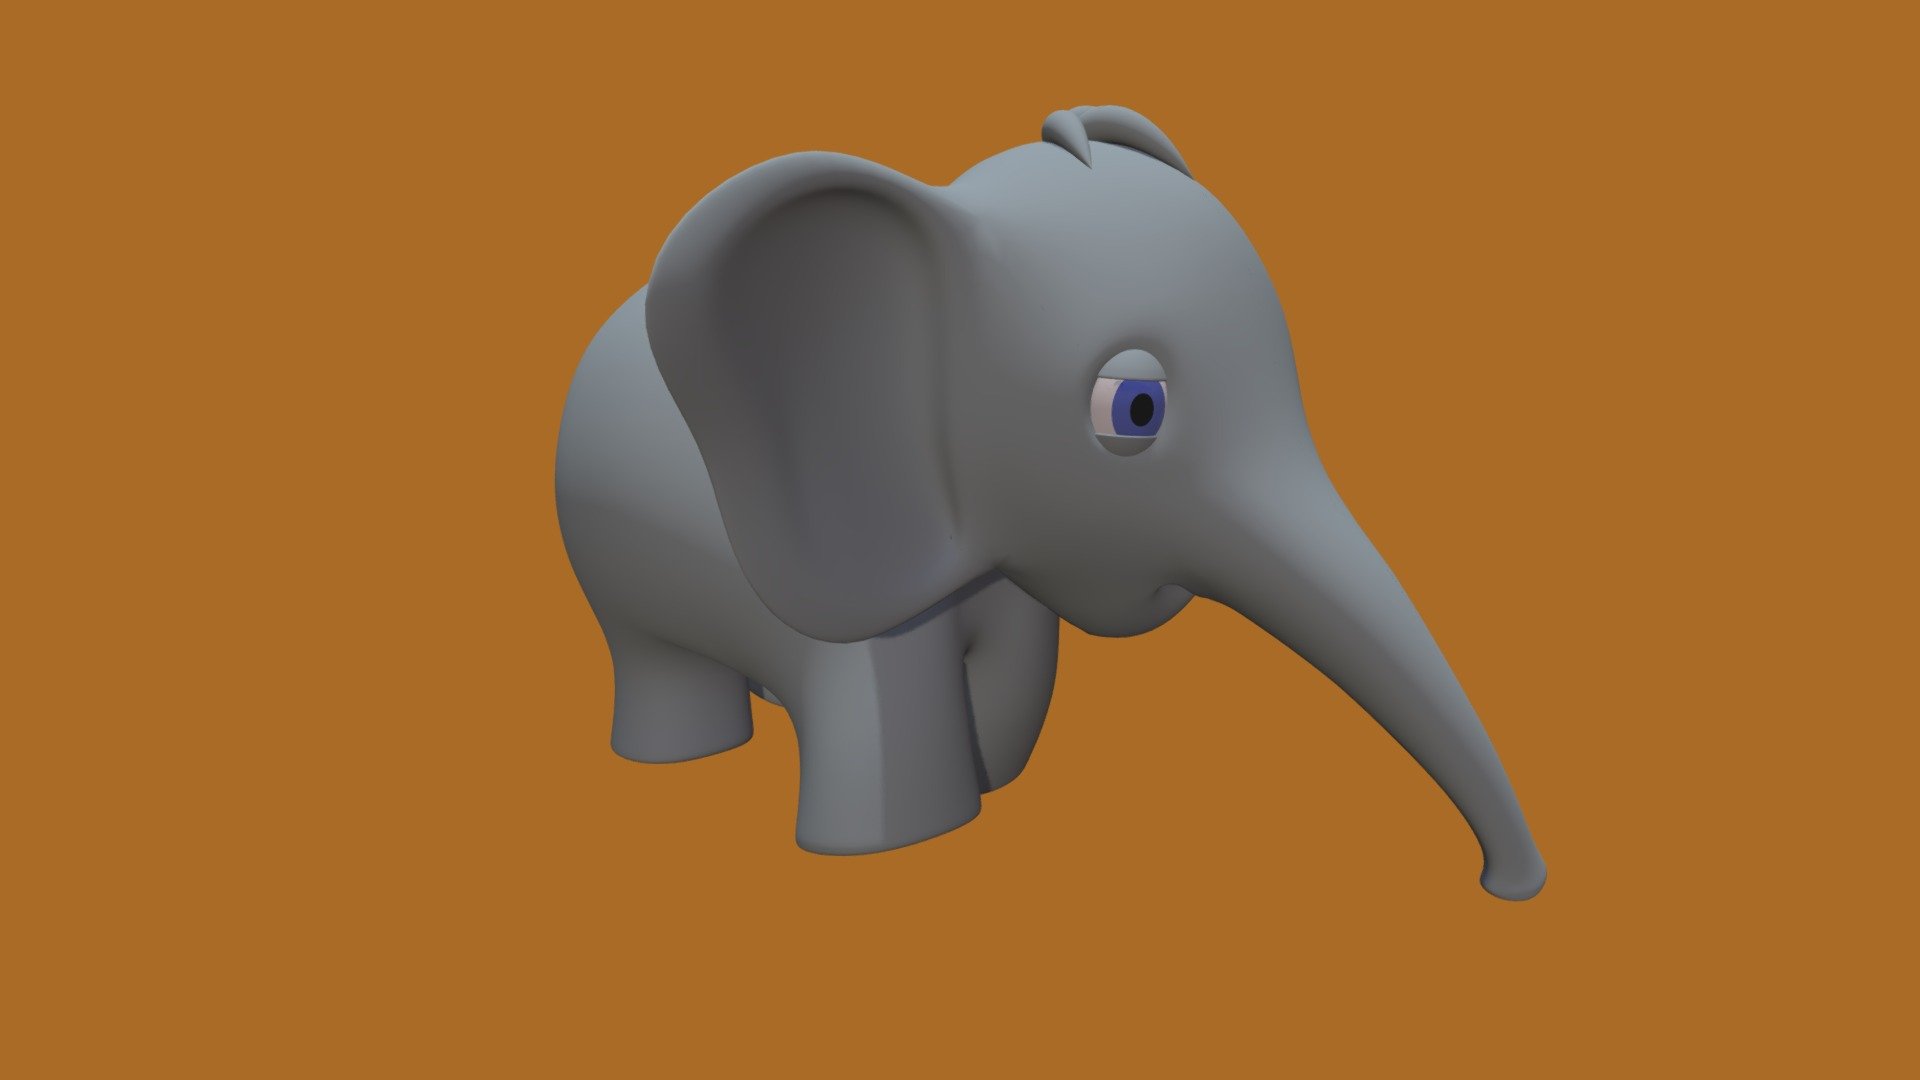 Walking animation of a cartoon elephant.

Character thought up by me and modeled and animated by blender 3d.

I hope you'll enjoy it 3d model